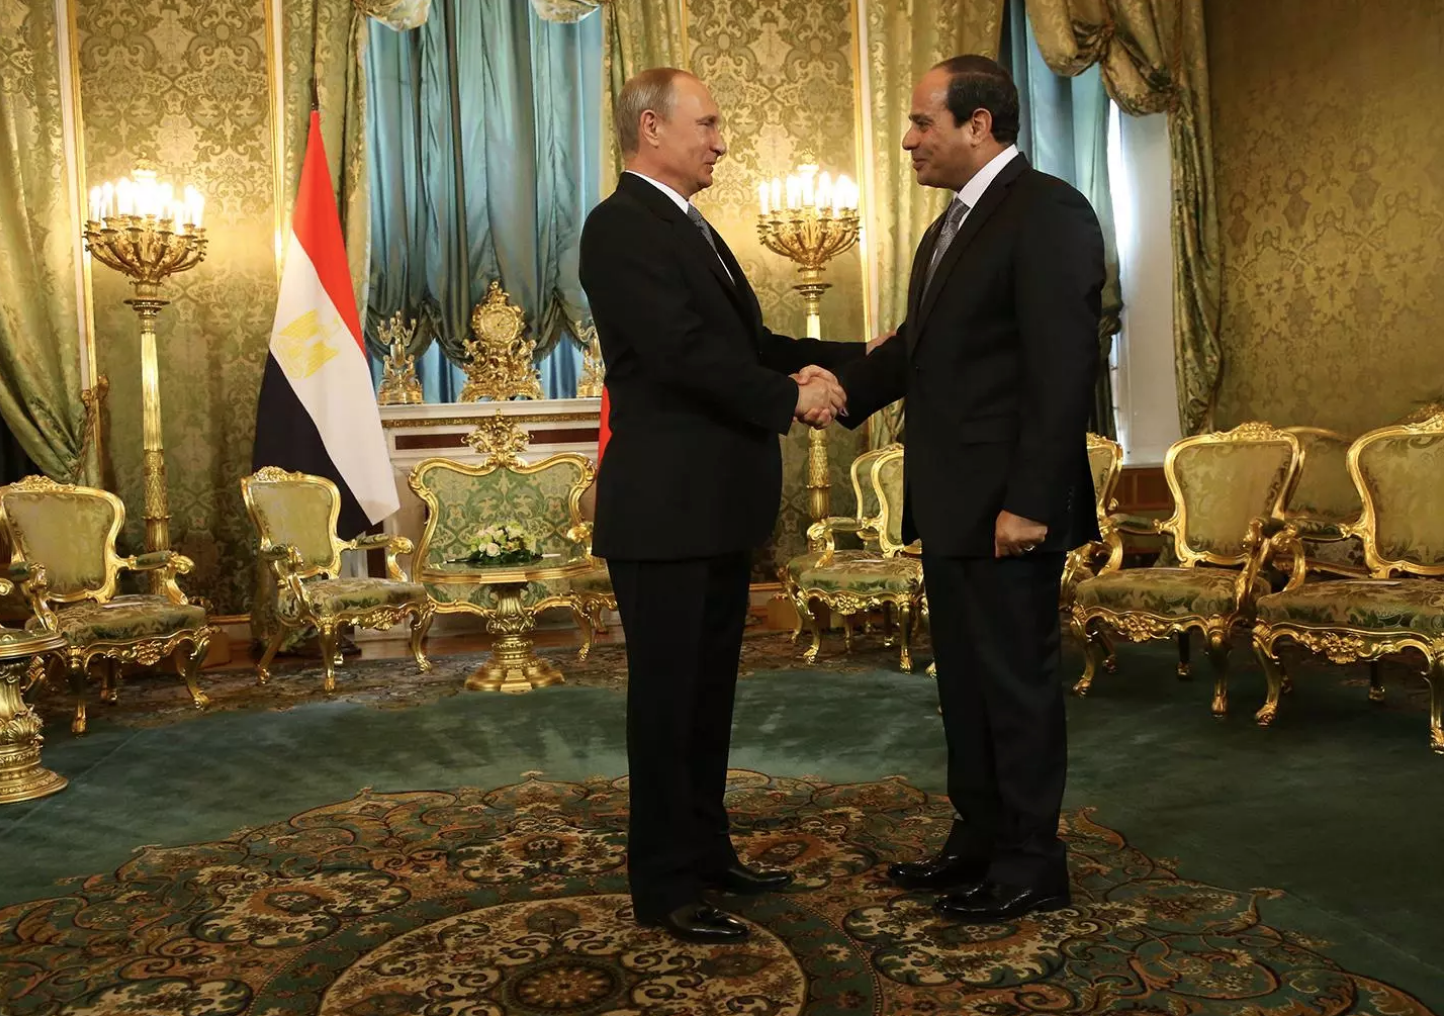 Russian President Vladimir Putin and Egyptian President Abdel Fattah el-Sissi during their talks in Moscow in 2015. It was Sissi’s third visit since taking office in 2012. Image by Sasha Mordovets. Russia, 2015. 